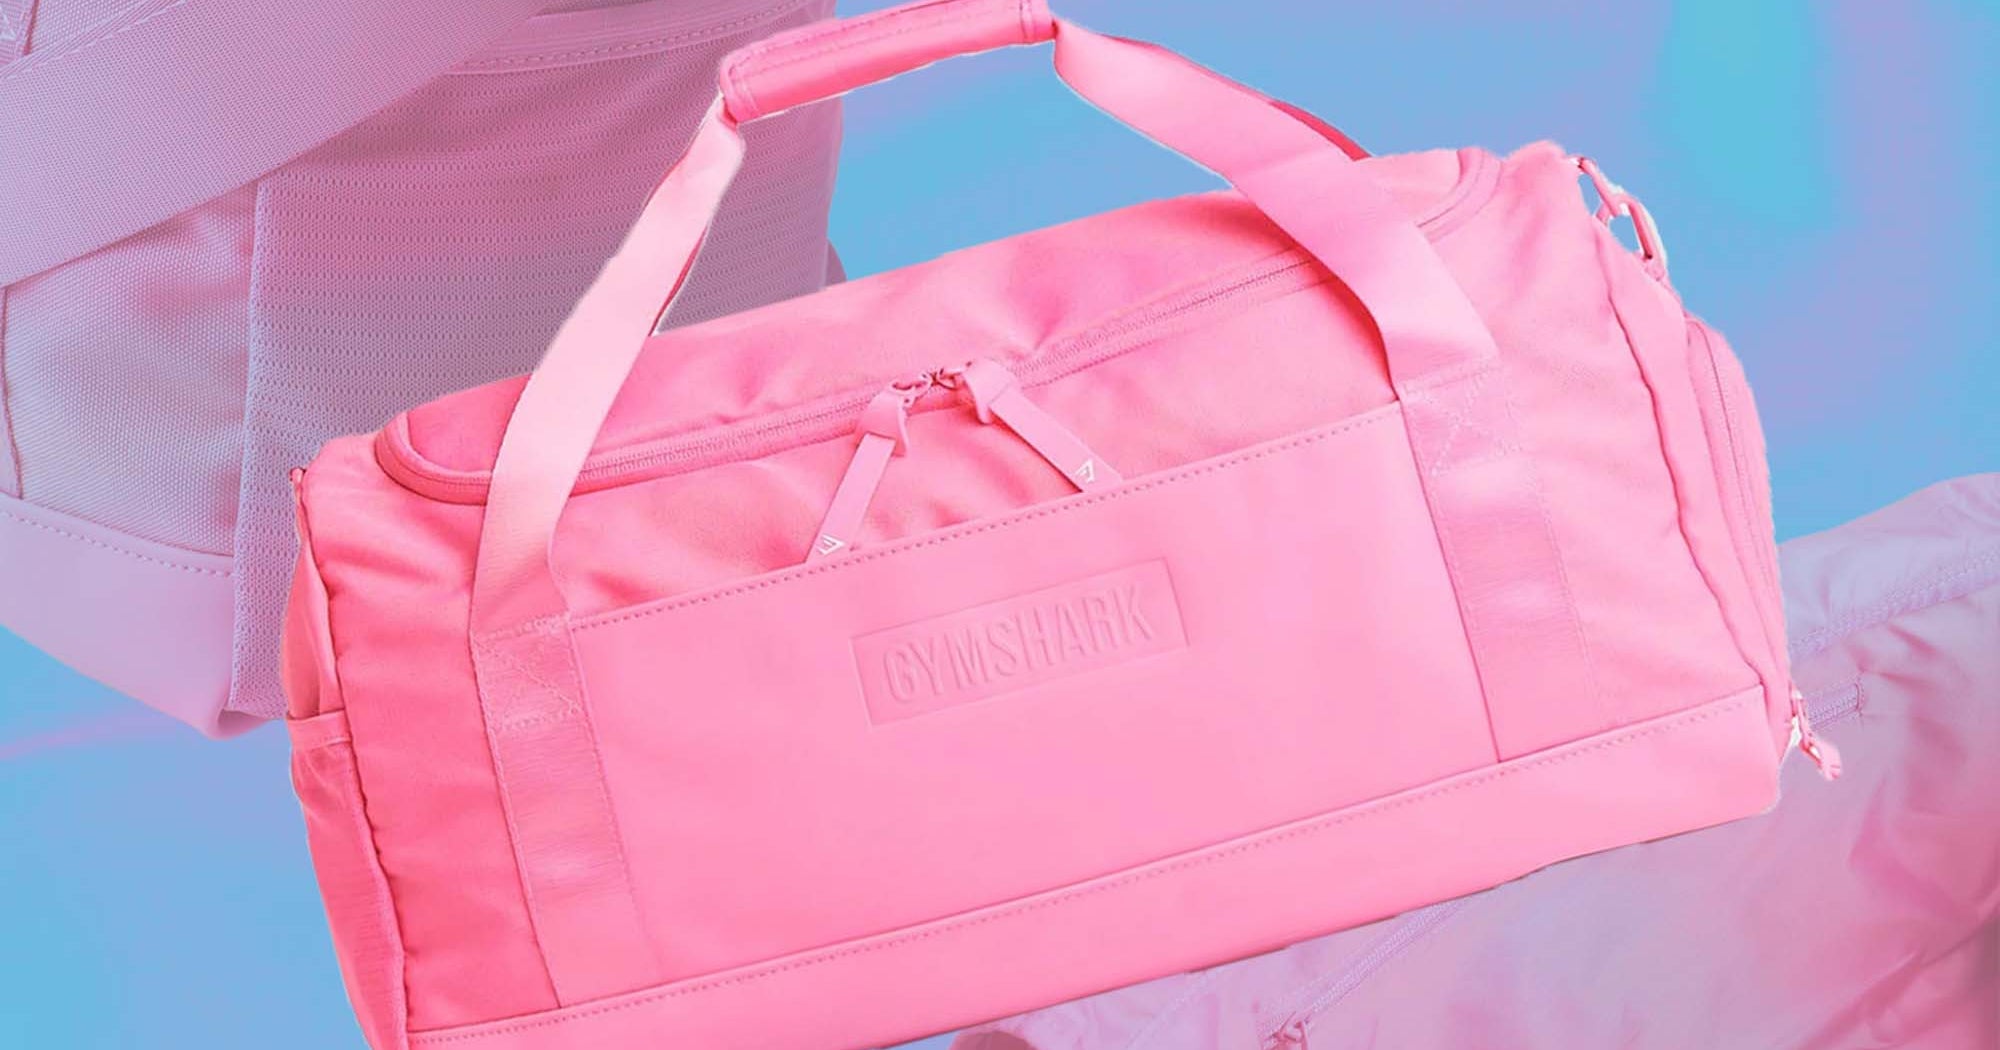 15 Fashionable Gym Bags to Shlep Your Workout Gear in Style